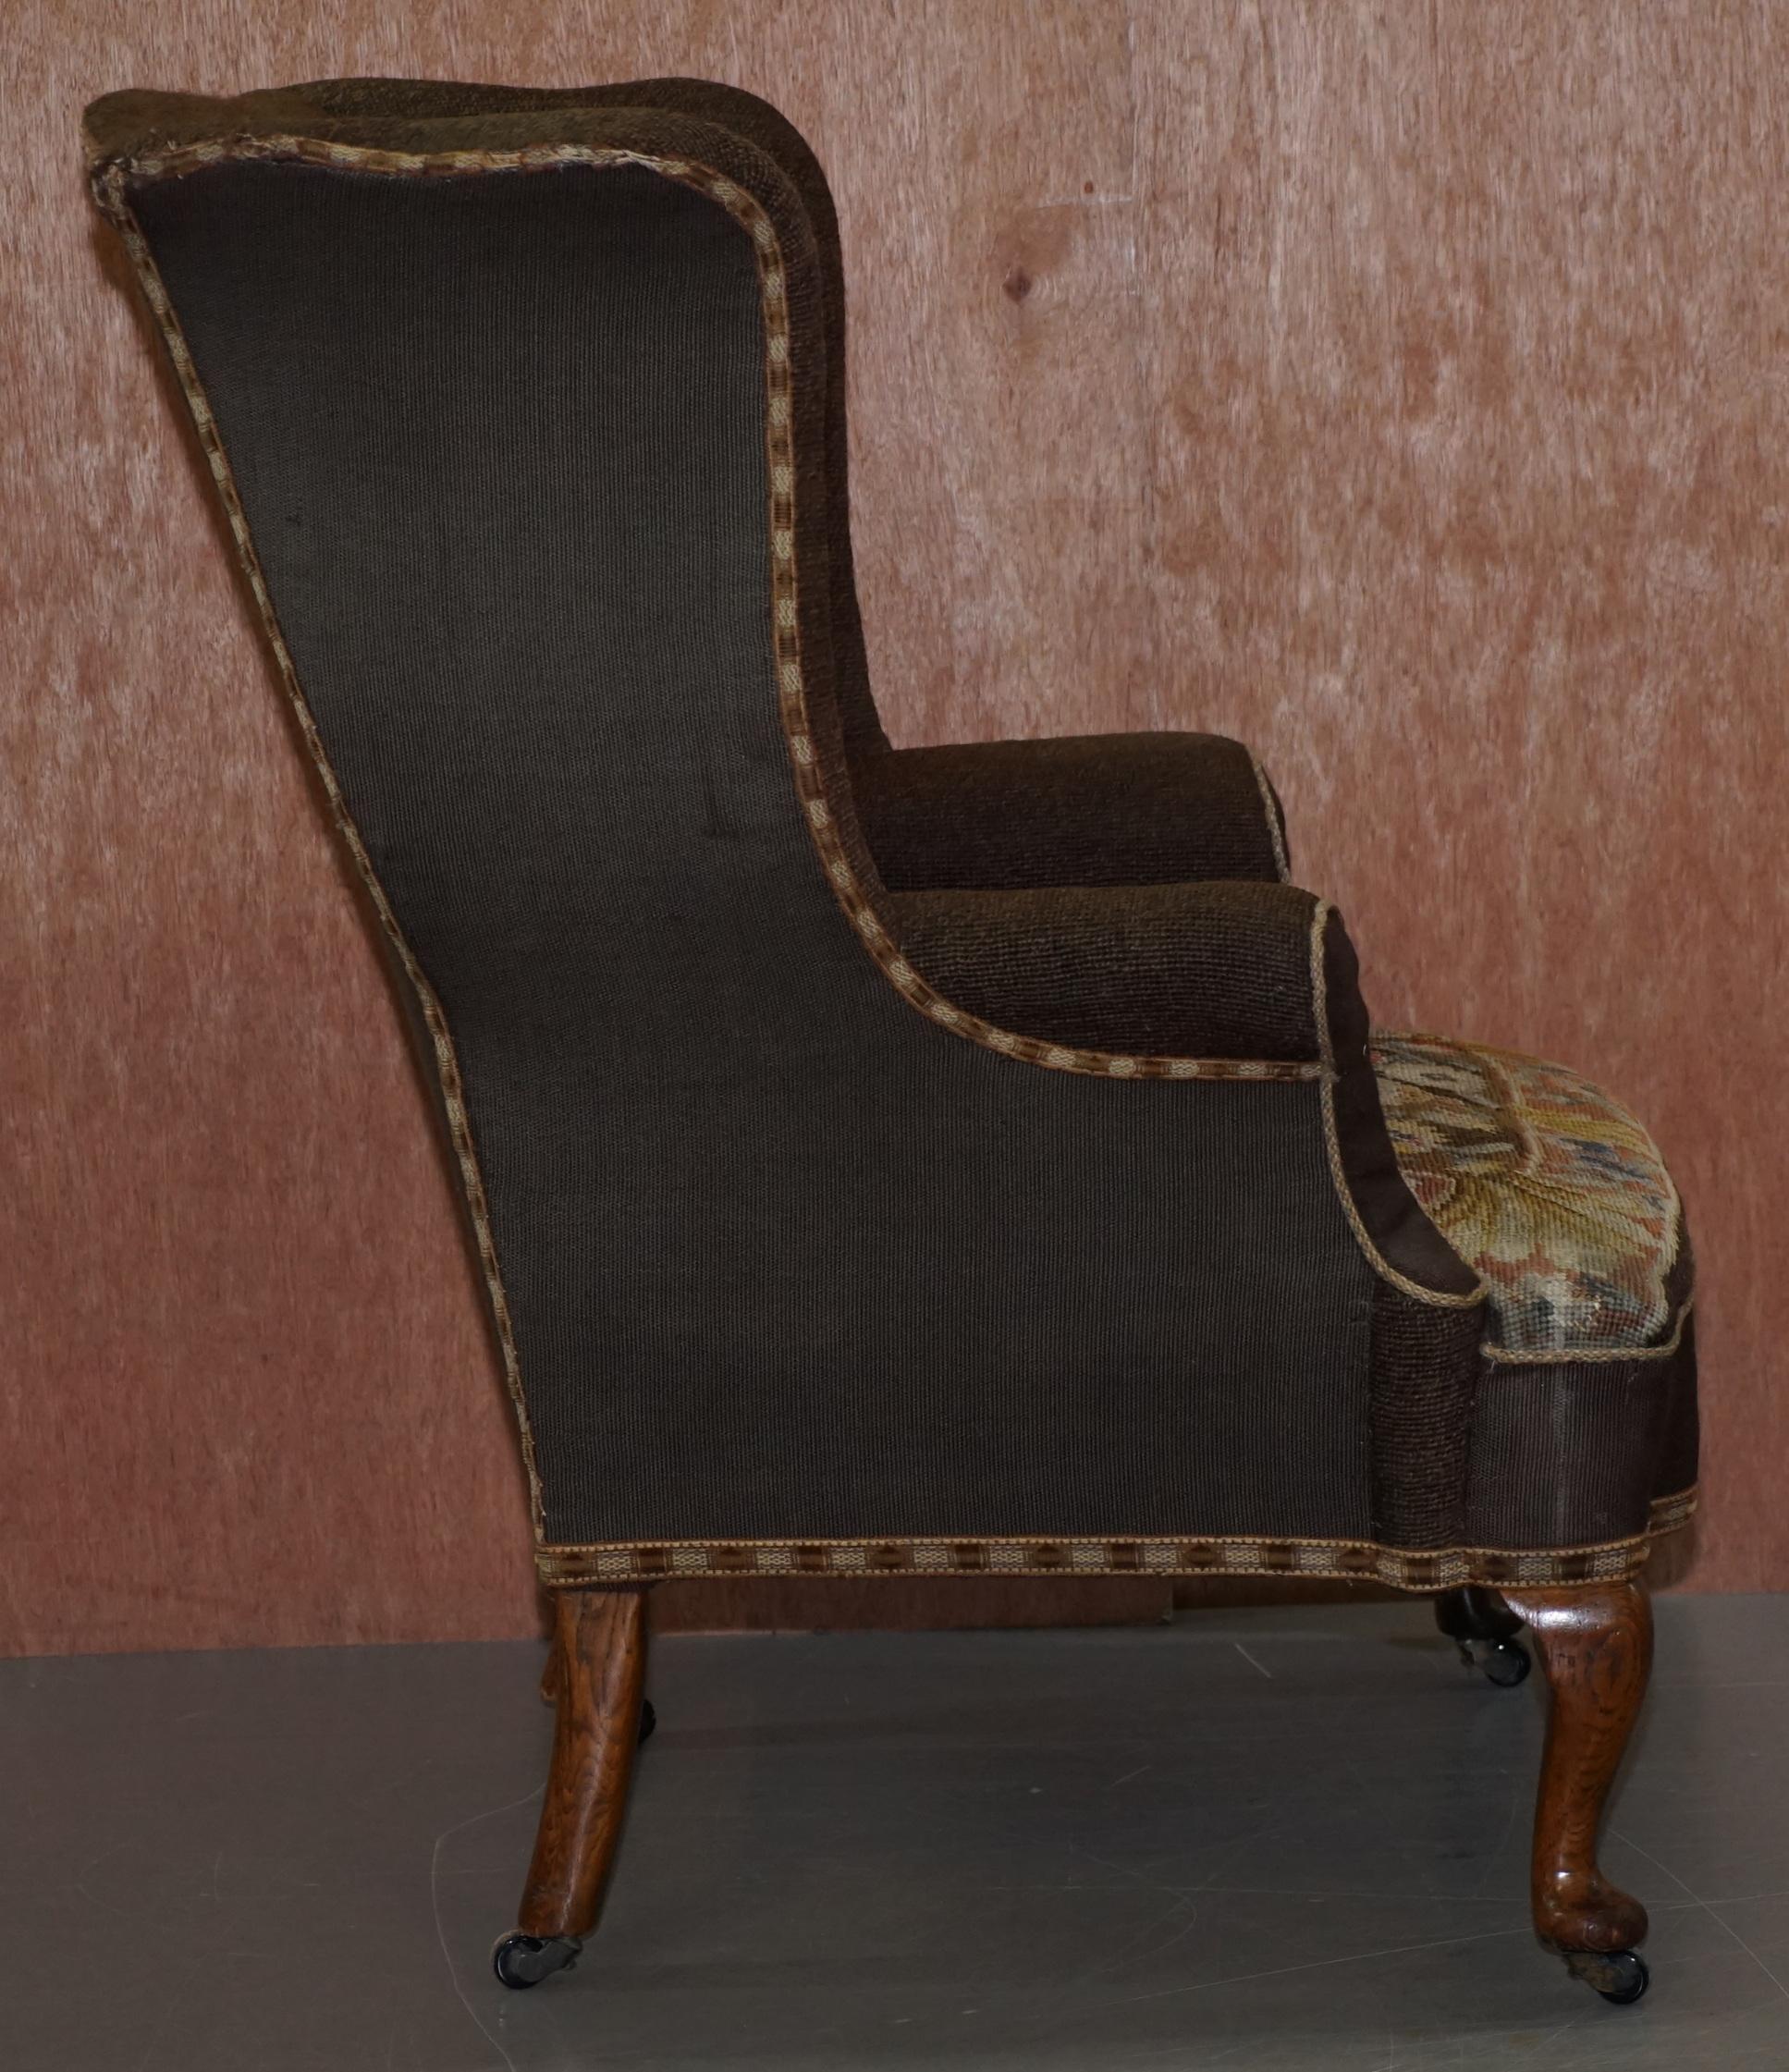 Original circa 1840 Antique Victorian Wingback Armchair Embroidered Upholstery For Sale 3